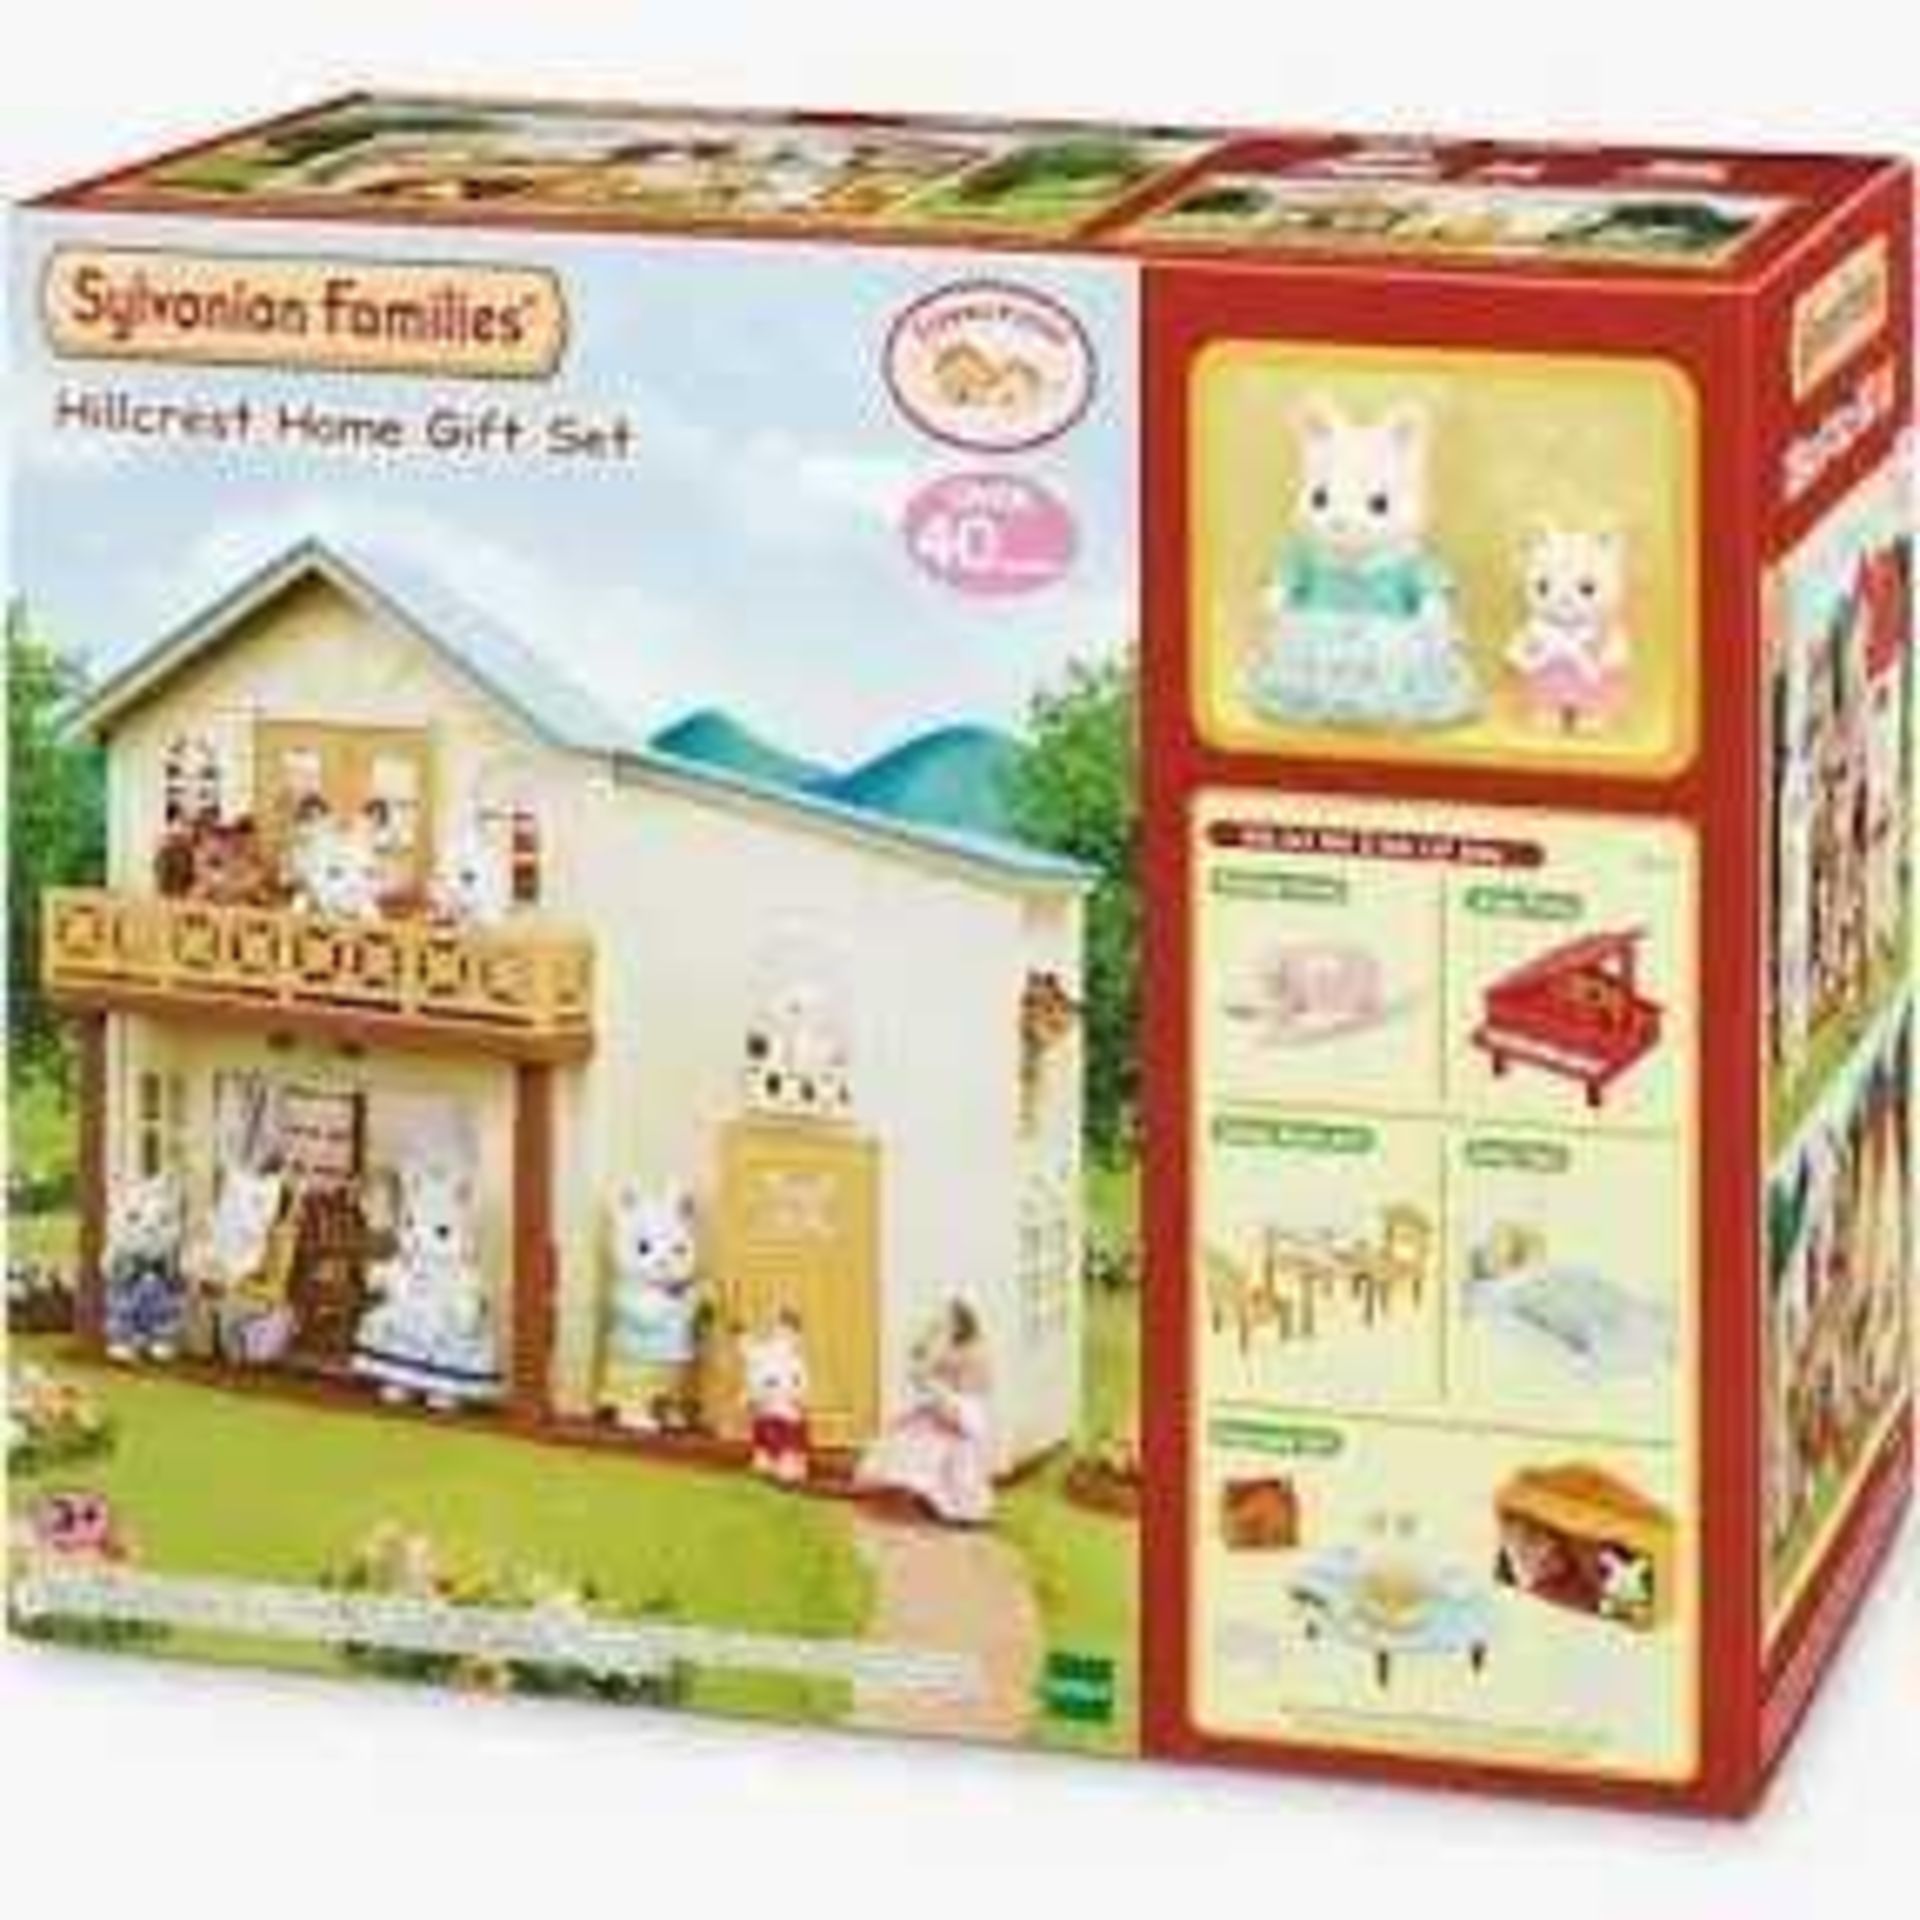 RRP £80 Boxed Sylvanian Families Hillcrest Home Gift Set